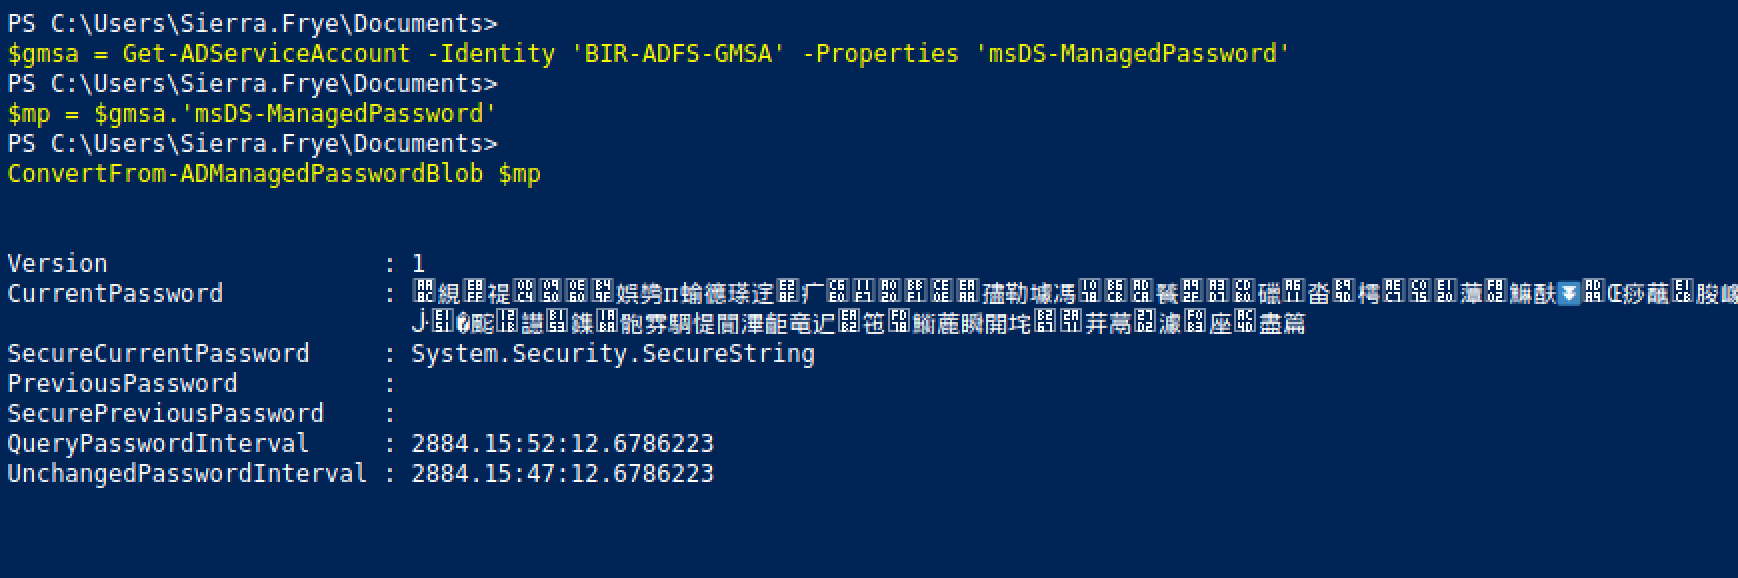 Viewing the MSDS-MANAGEDPASSWORD_BLOB data structure.